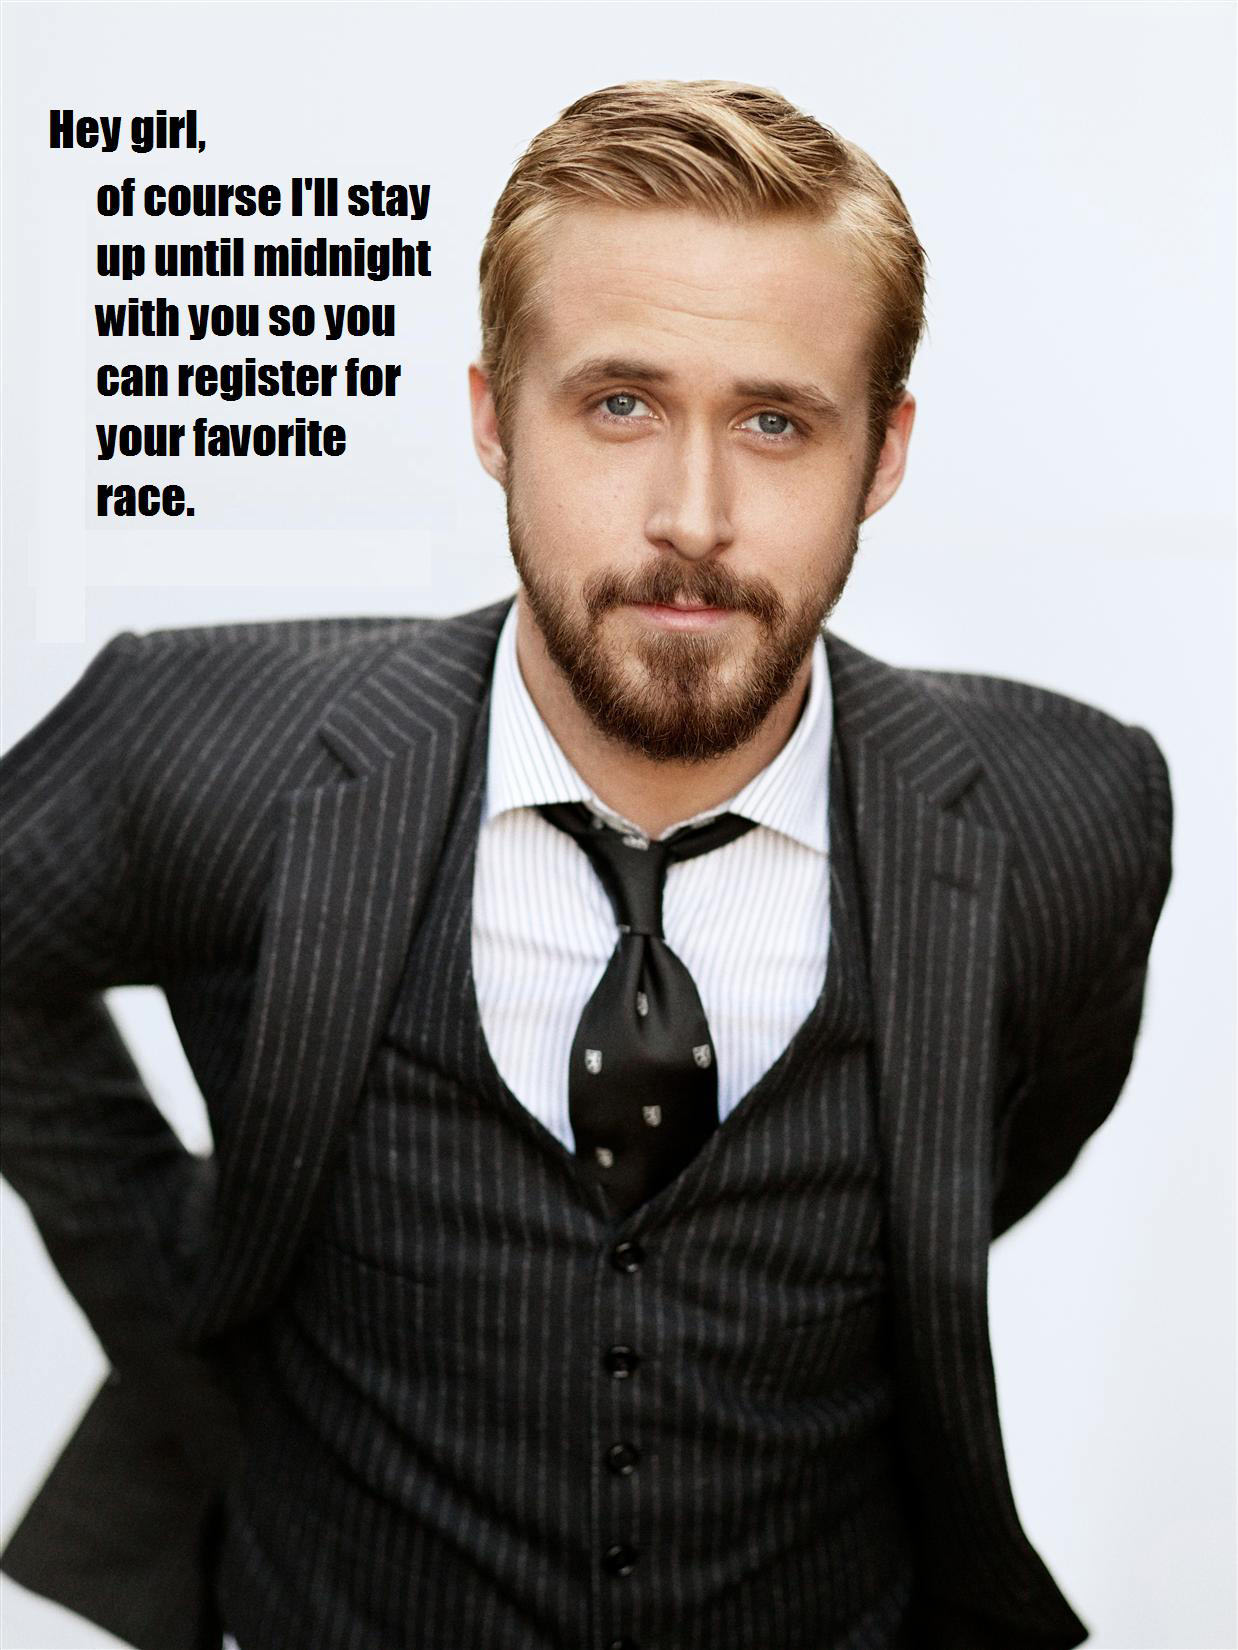 Runner Things #2479: Hey girl, of course I'll stay up until midnight with you so you can register for your favorite race.